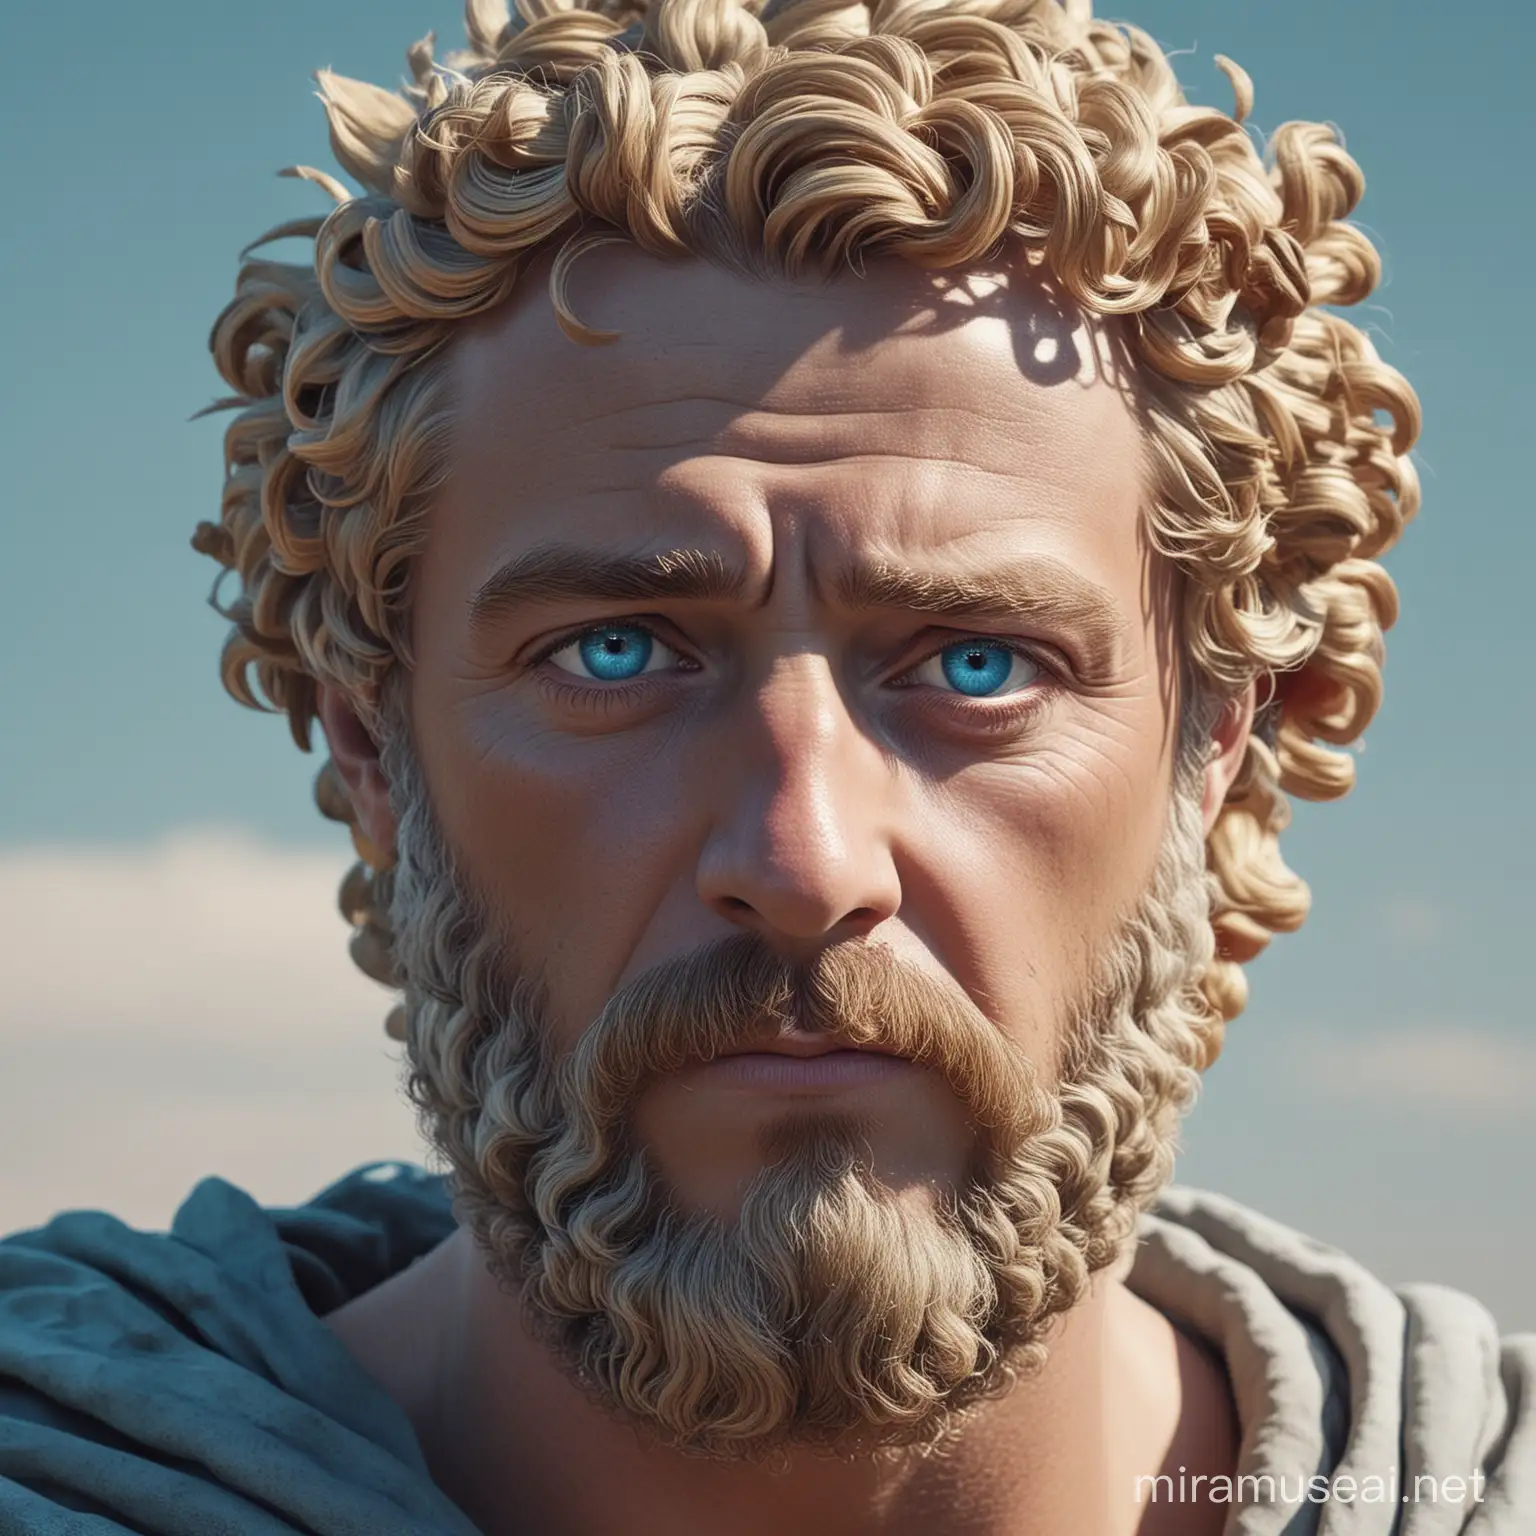 Marcus Aurelius Stoic Profile Portrait with Blue Eyes and Blond Hair